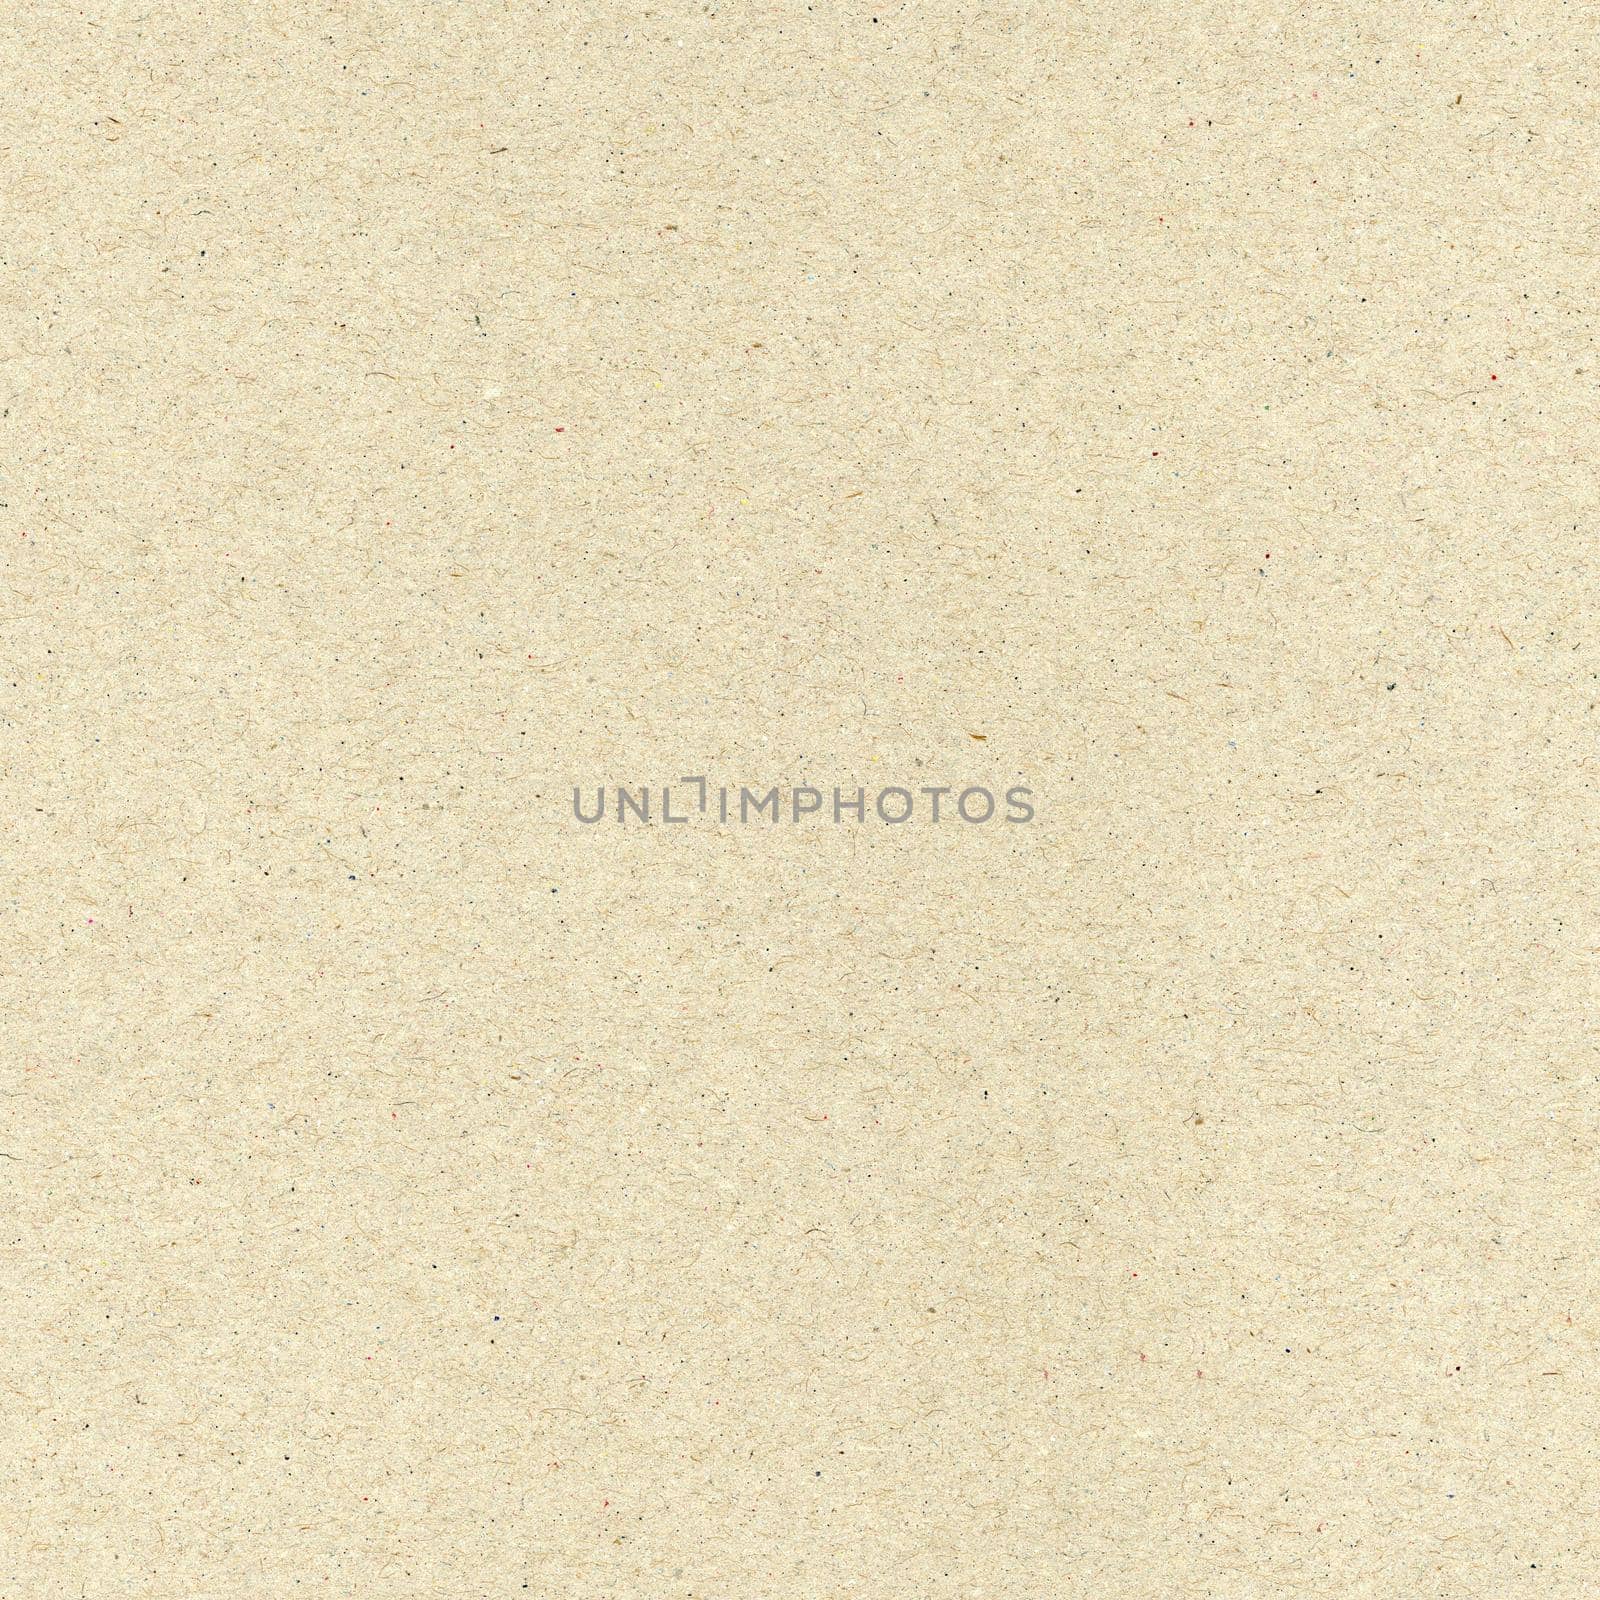 square light brown cardboard texture background by claudiodivizia